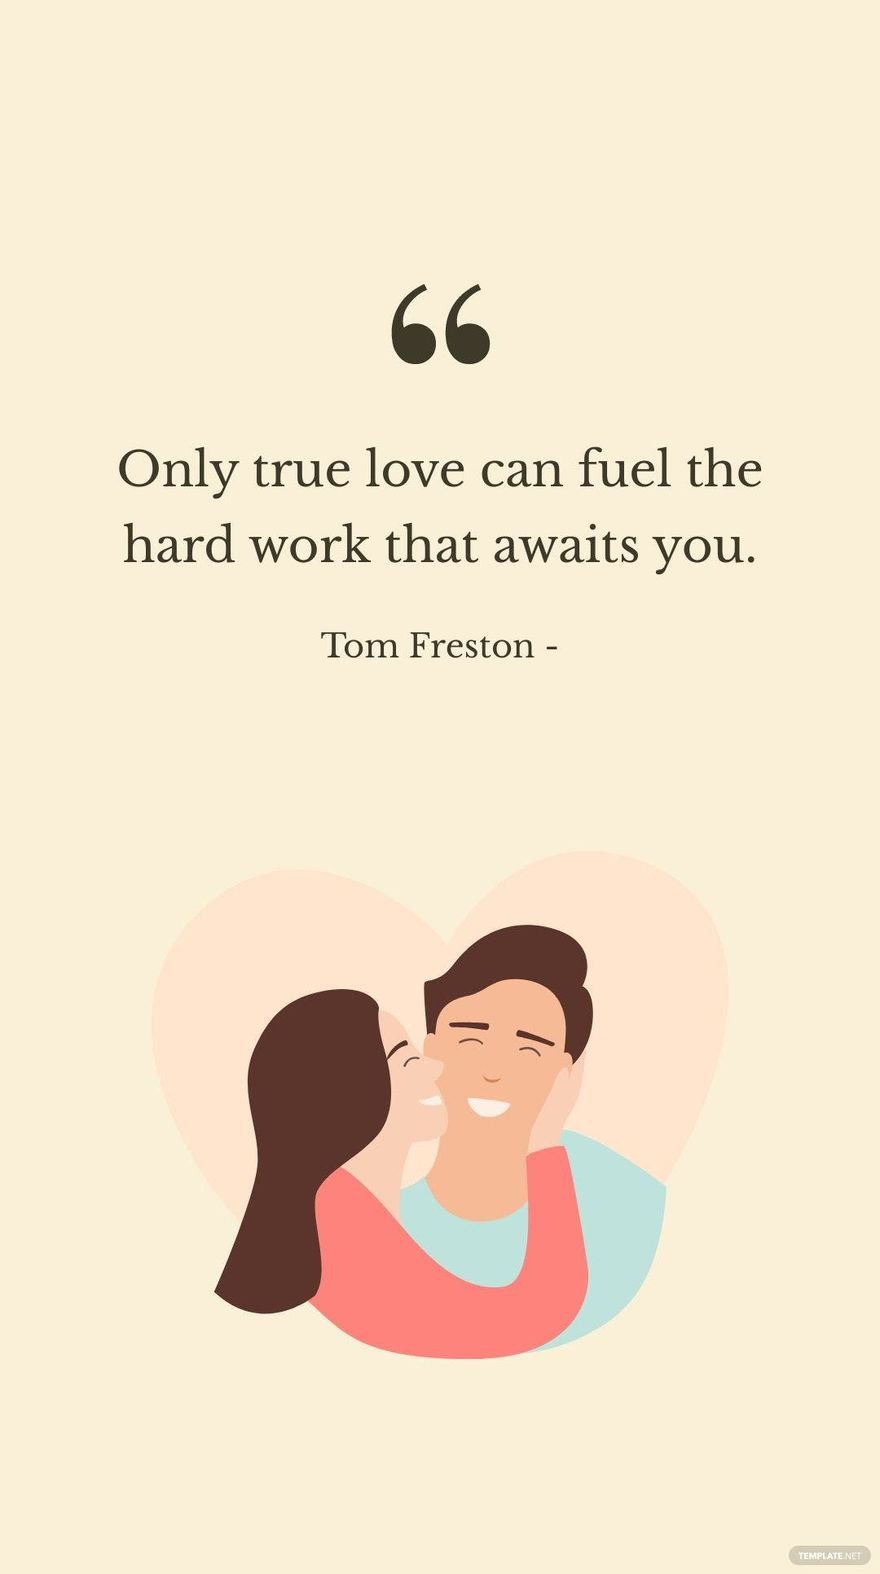 Free Tom Freston - Only true love can fuel the hard work that awaits you. in JPG